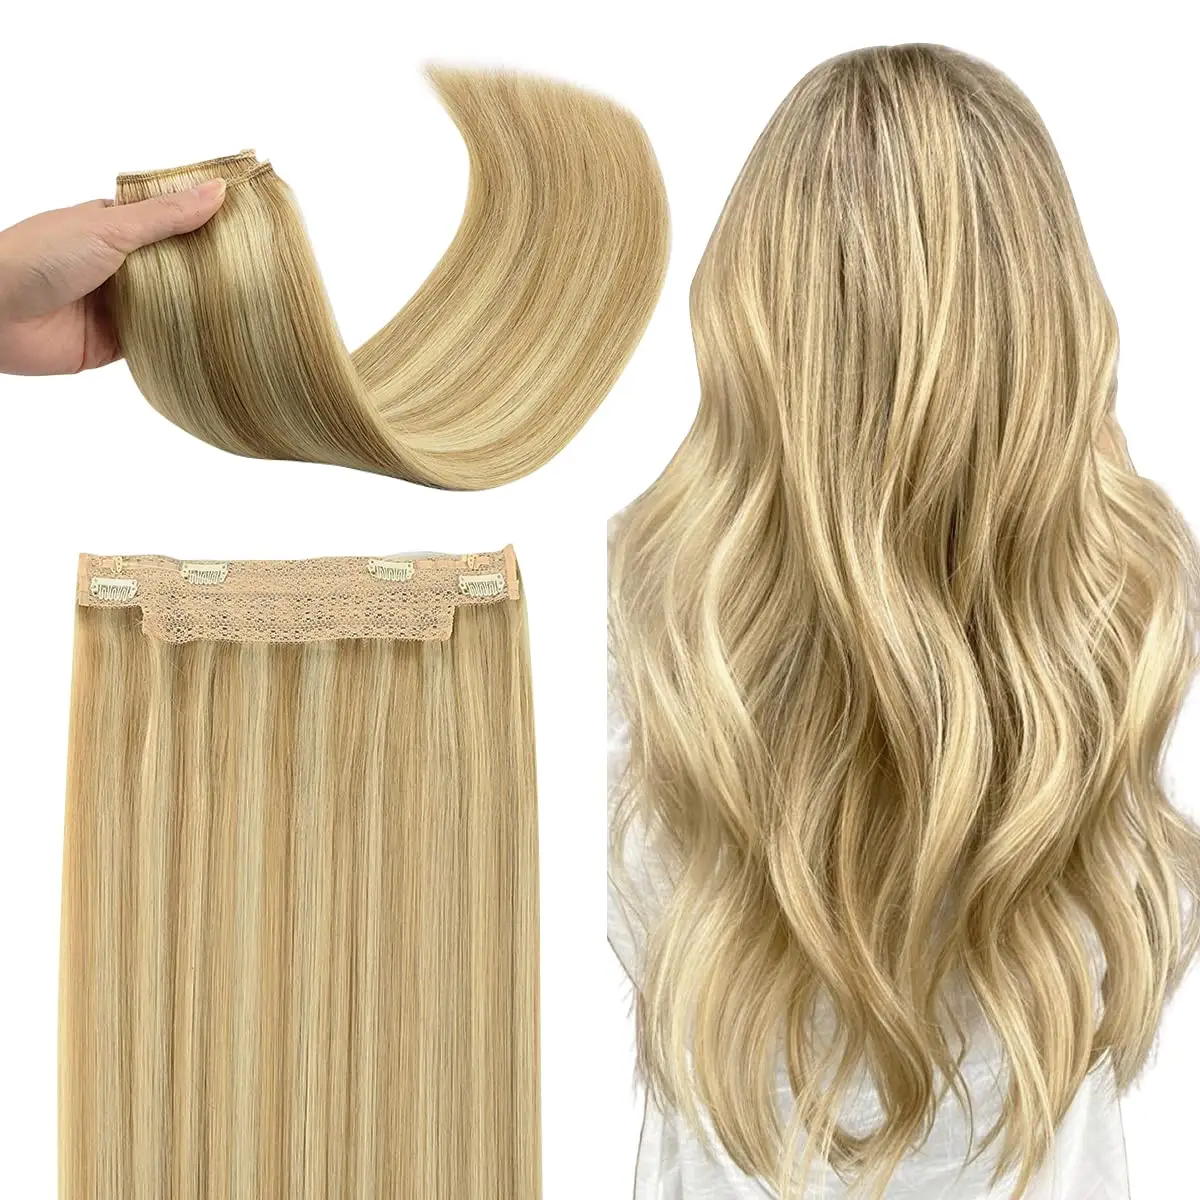 70g Light Blonde 613 Invisible Wire Fish Line Hair Extensions Straight Human Flip Hair Extensions